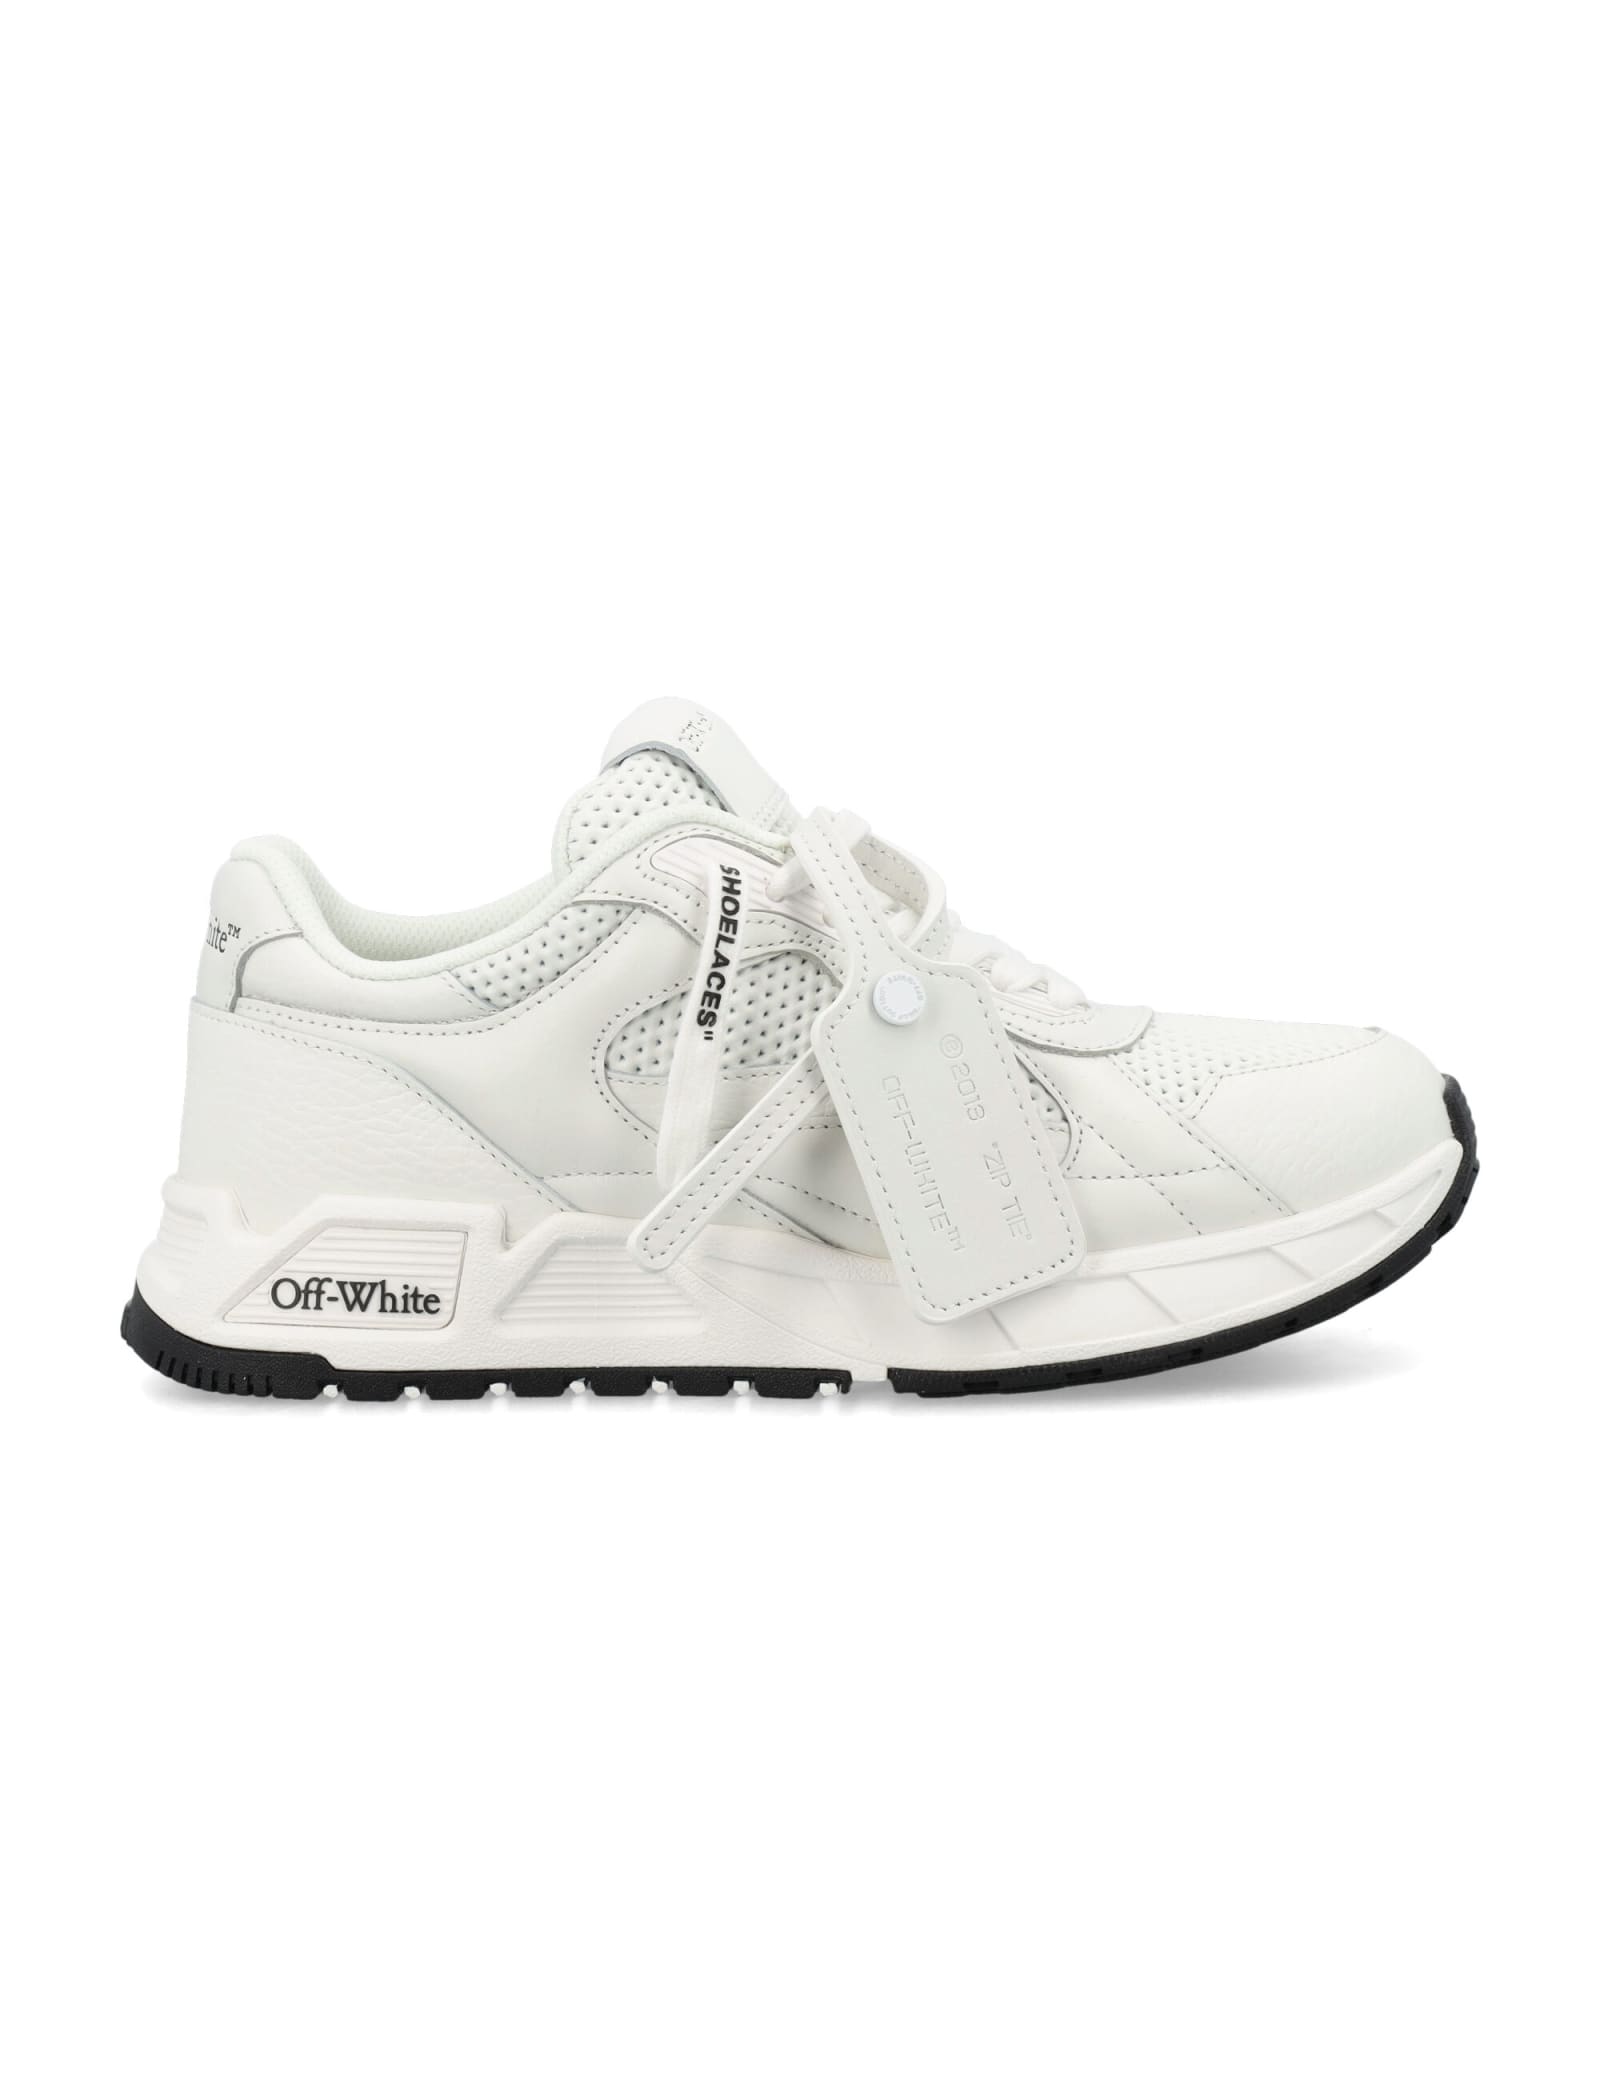 OFF-WHITE RUNNER B WOMAN SNEAKERS